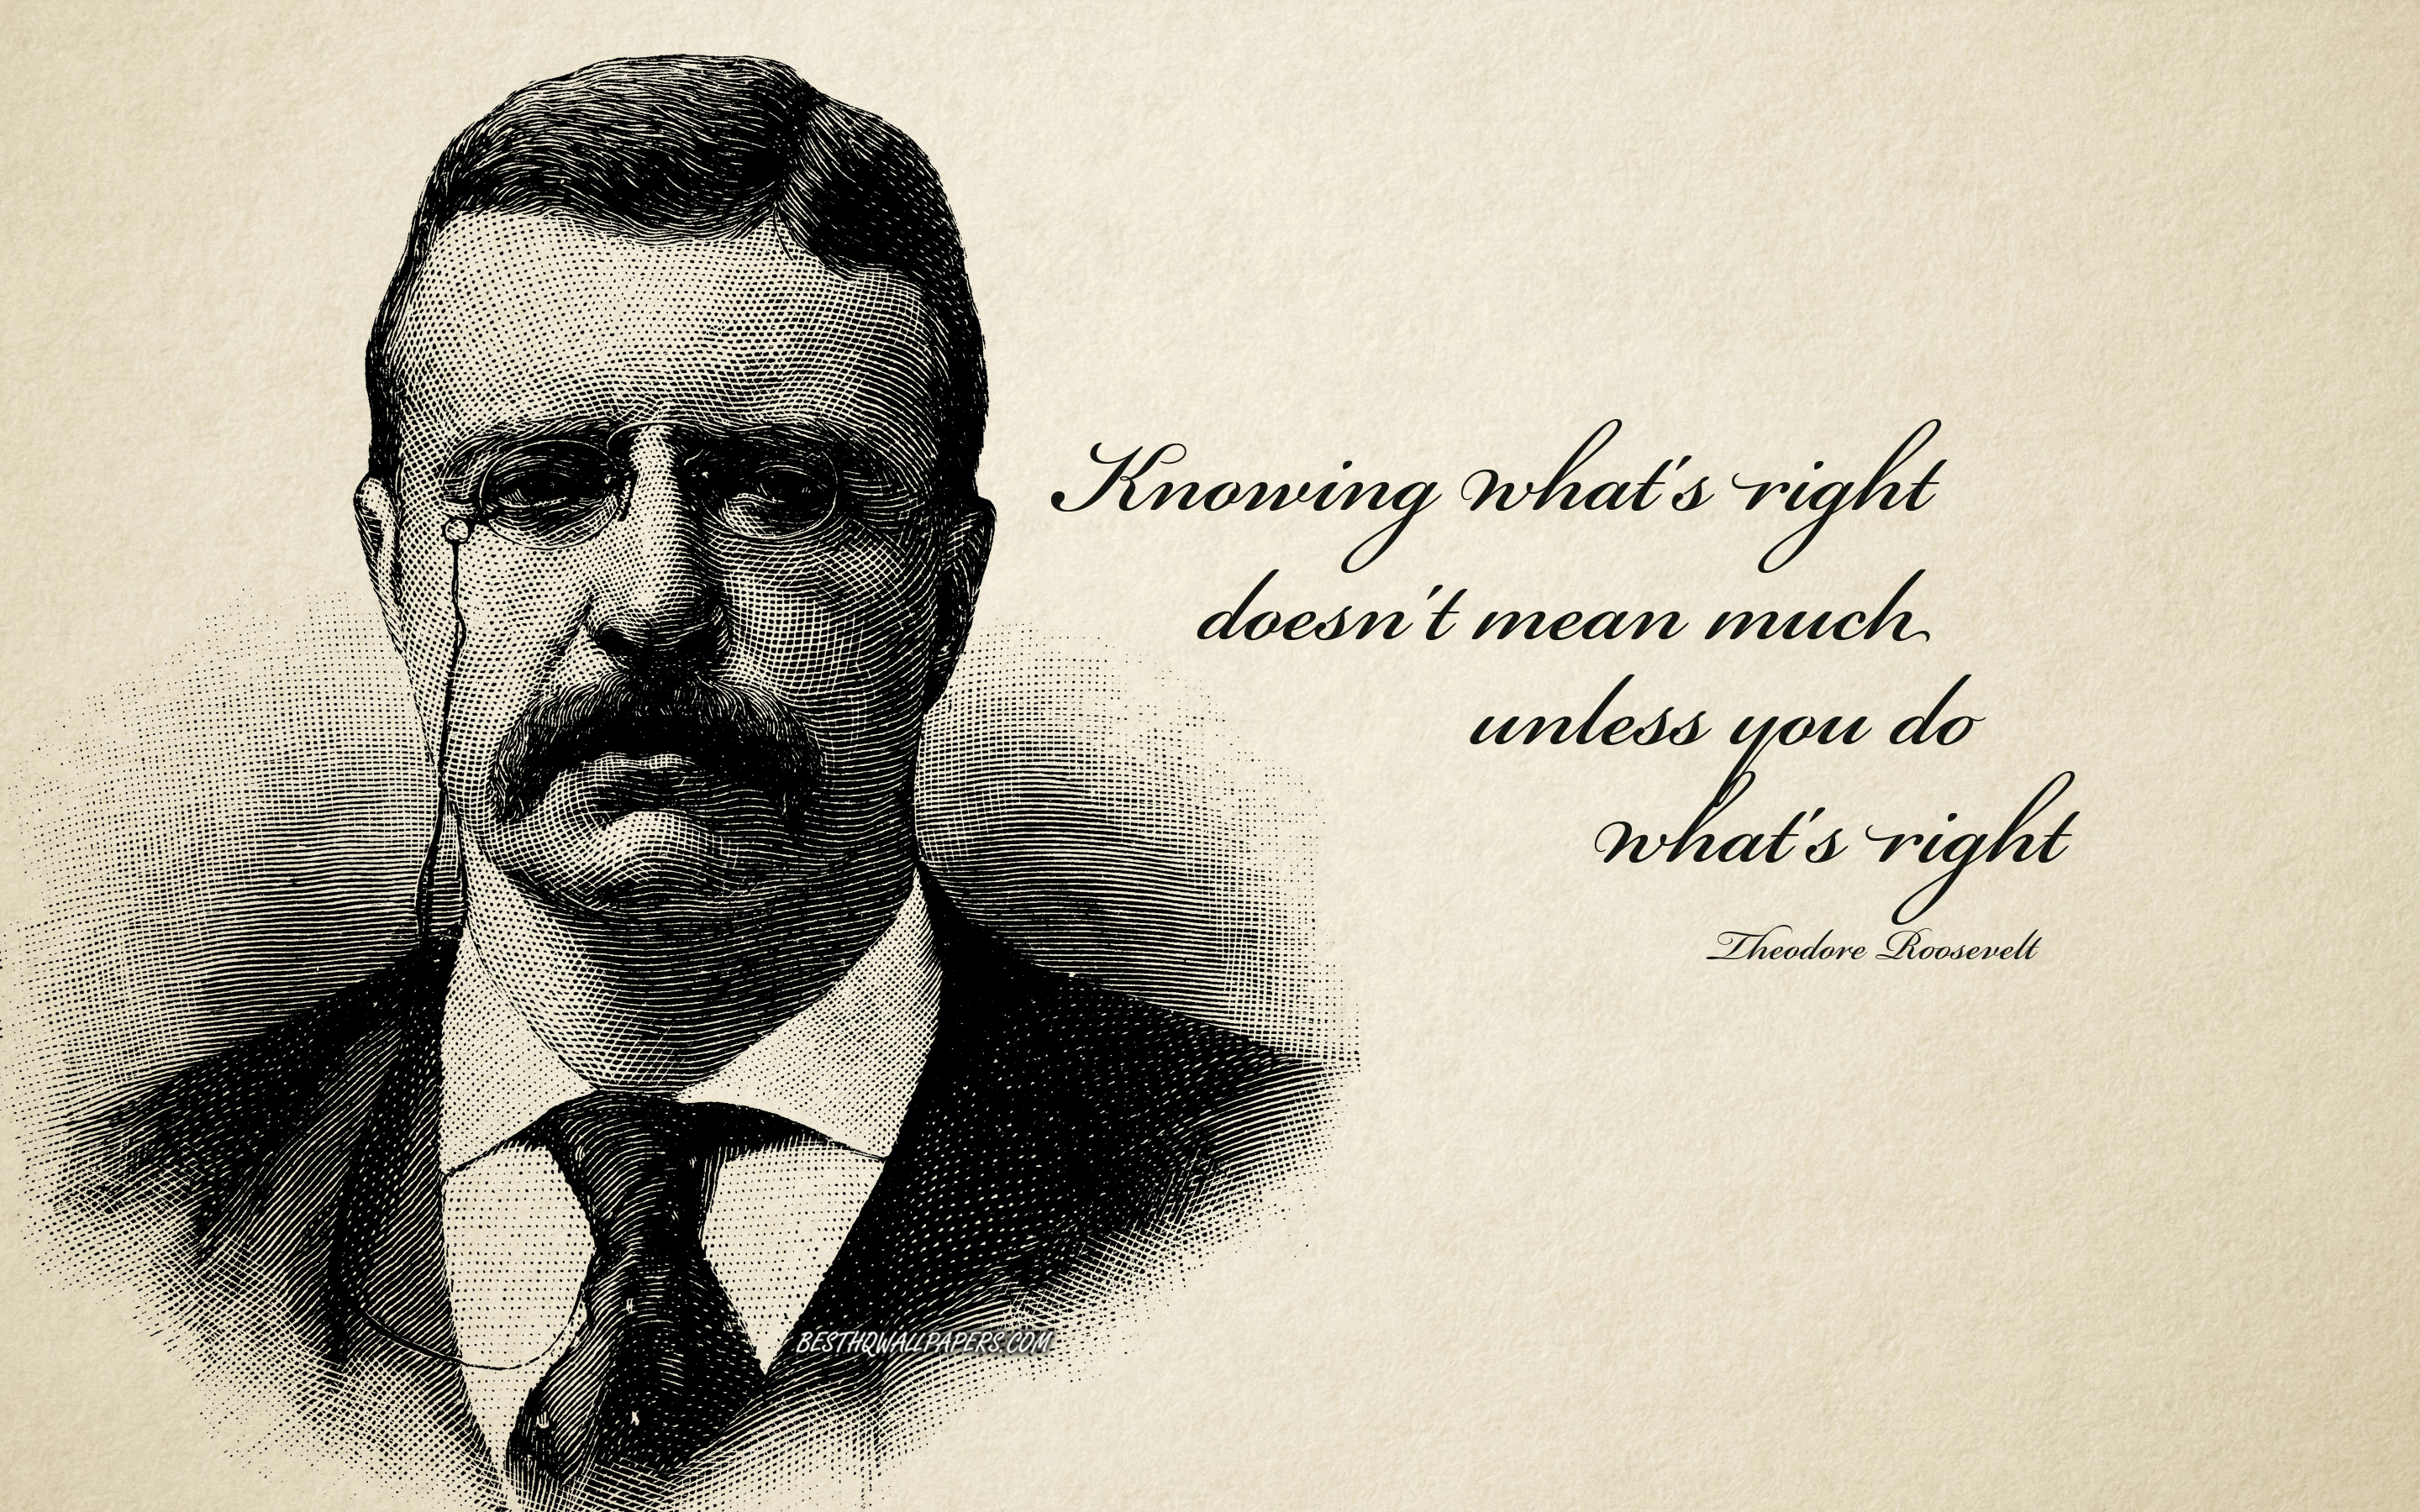 Download wallpaper Knowing what is right does not mean much unless you do what is right, Theodore Roosevelt quotes, motivation quotes, retro style, Roosevelt portrait, creative art for desktop with resolution 2880x1800